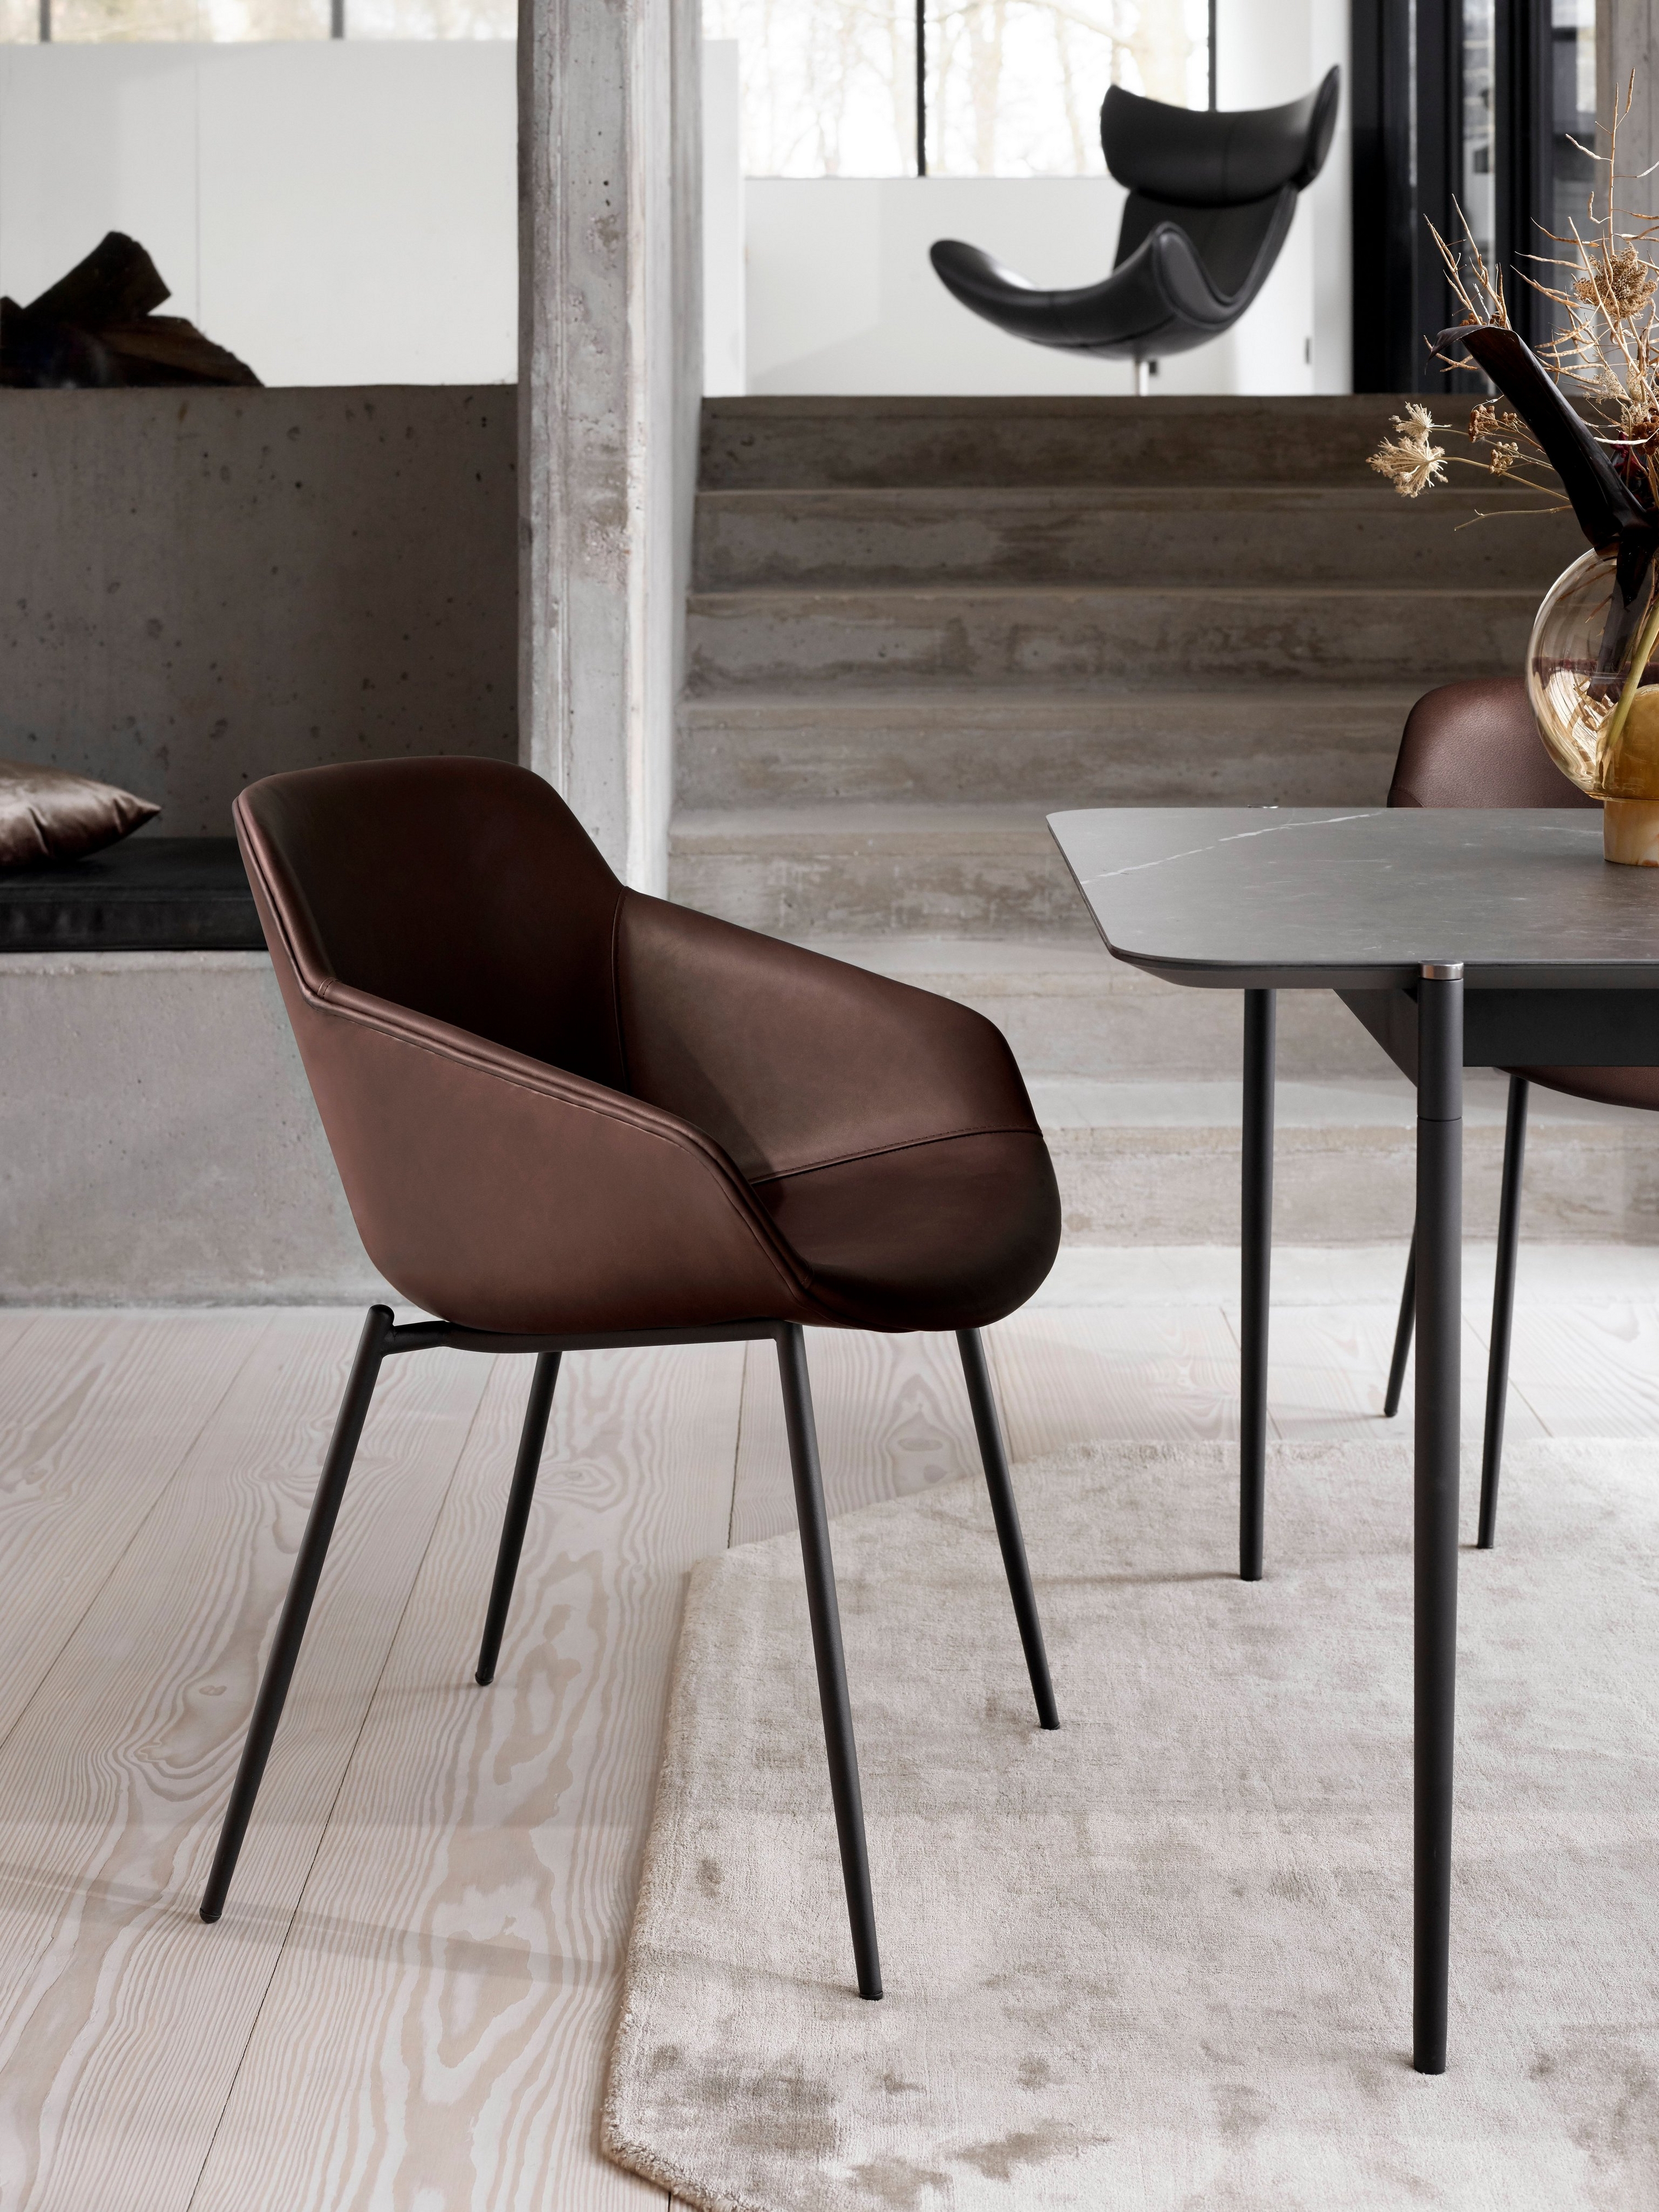 Leather dining chair with black legs, near a table with a vase, in a modern setting.